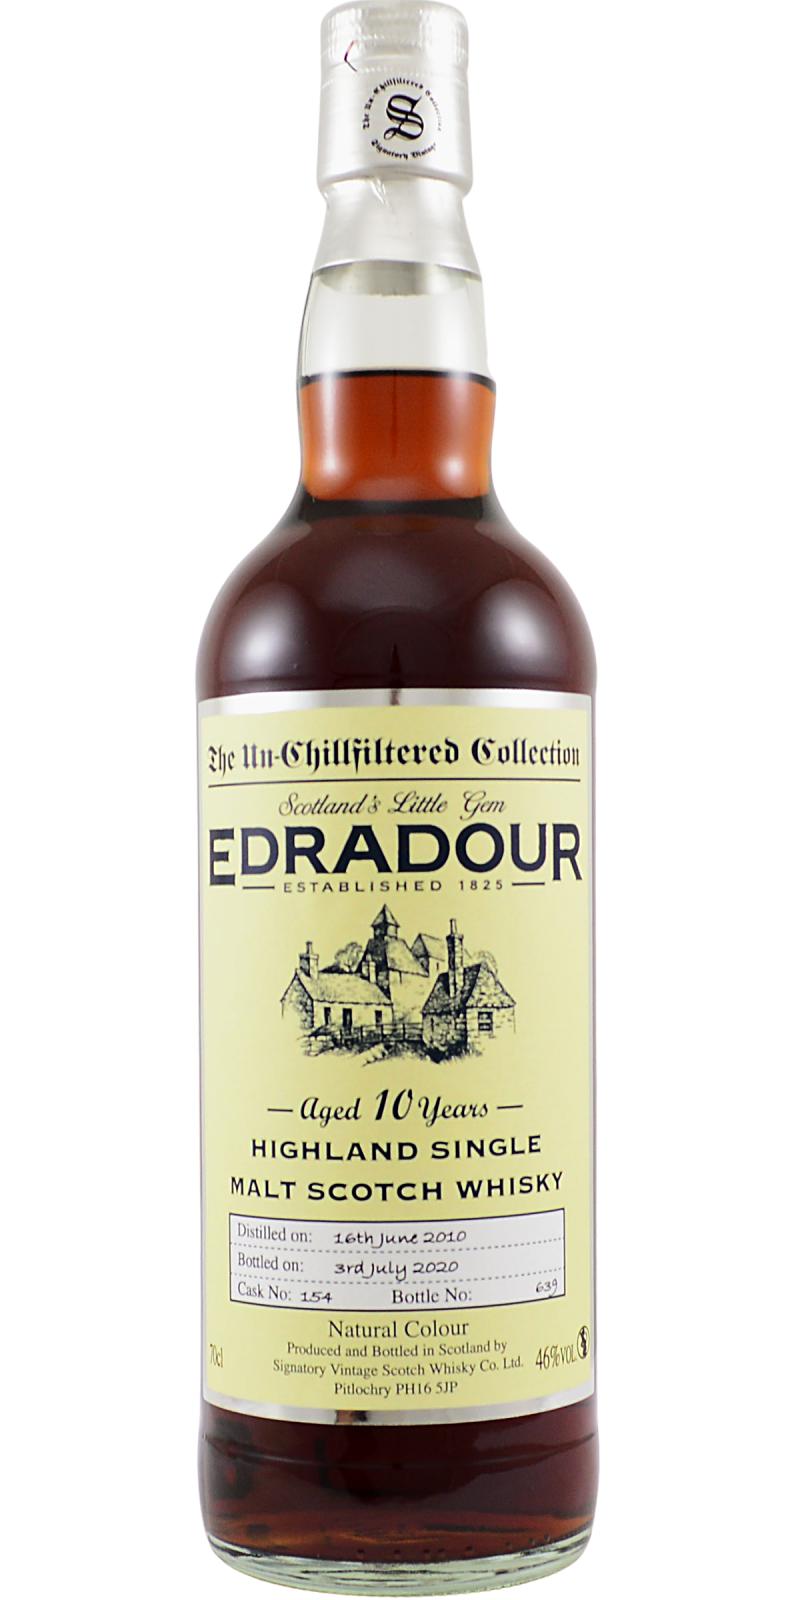 Edradour 2010 SV The Un-Chillfiltered Collection Sherry #154 46% 700ml